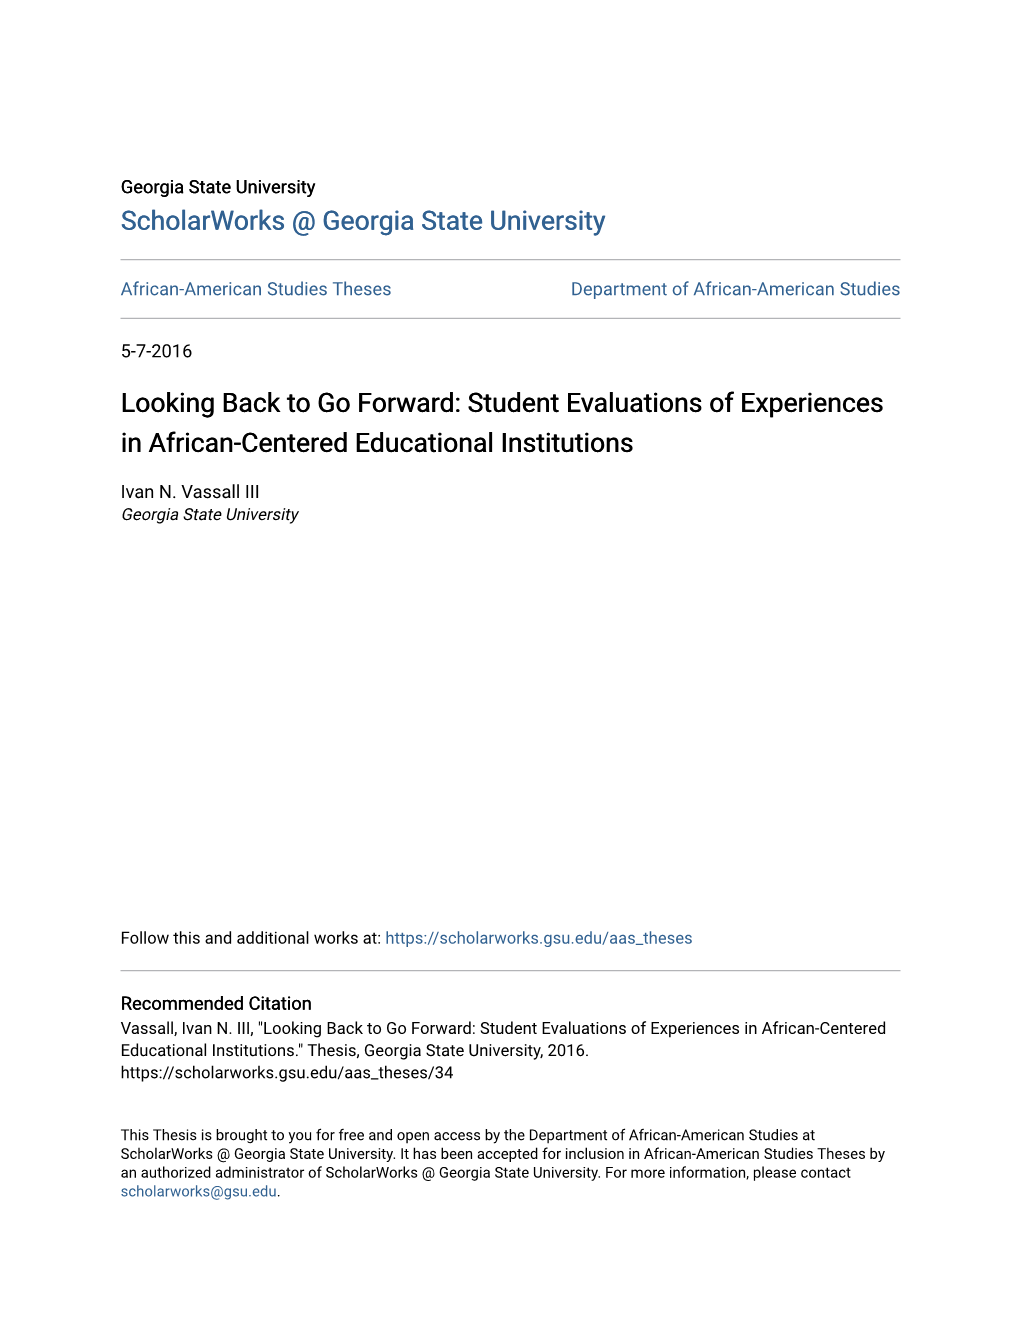 Student Evaluations of Experiences in African-Centered Educational Institutions